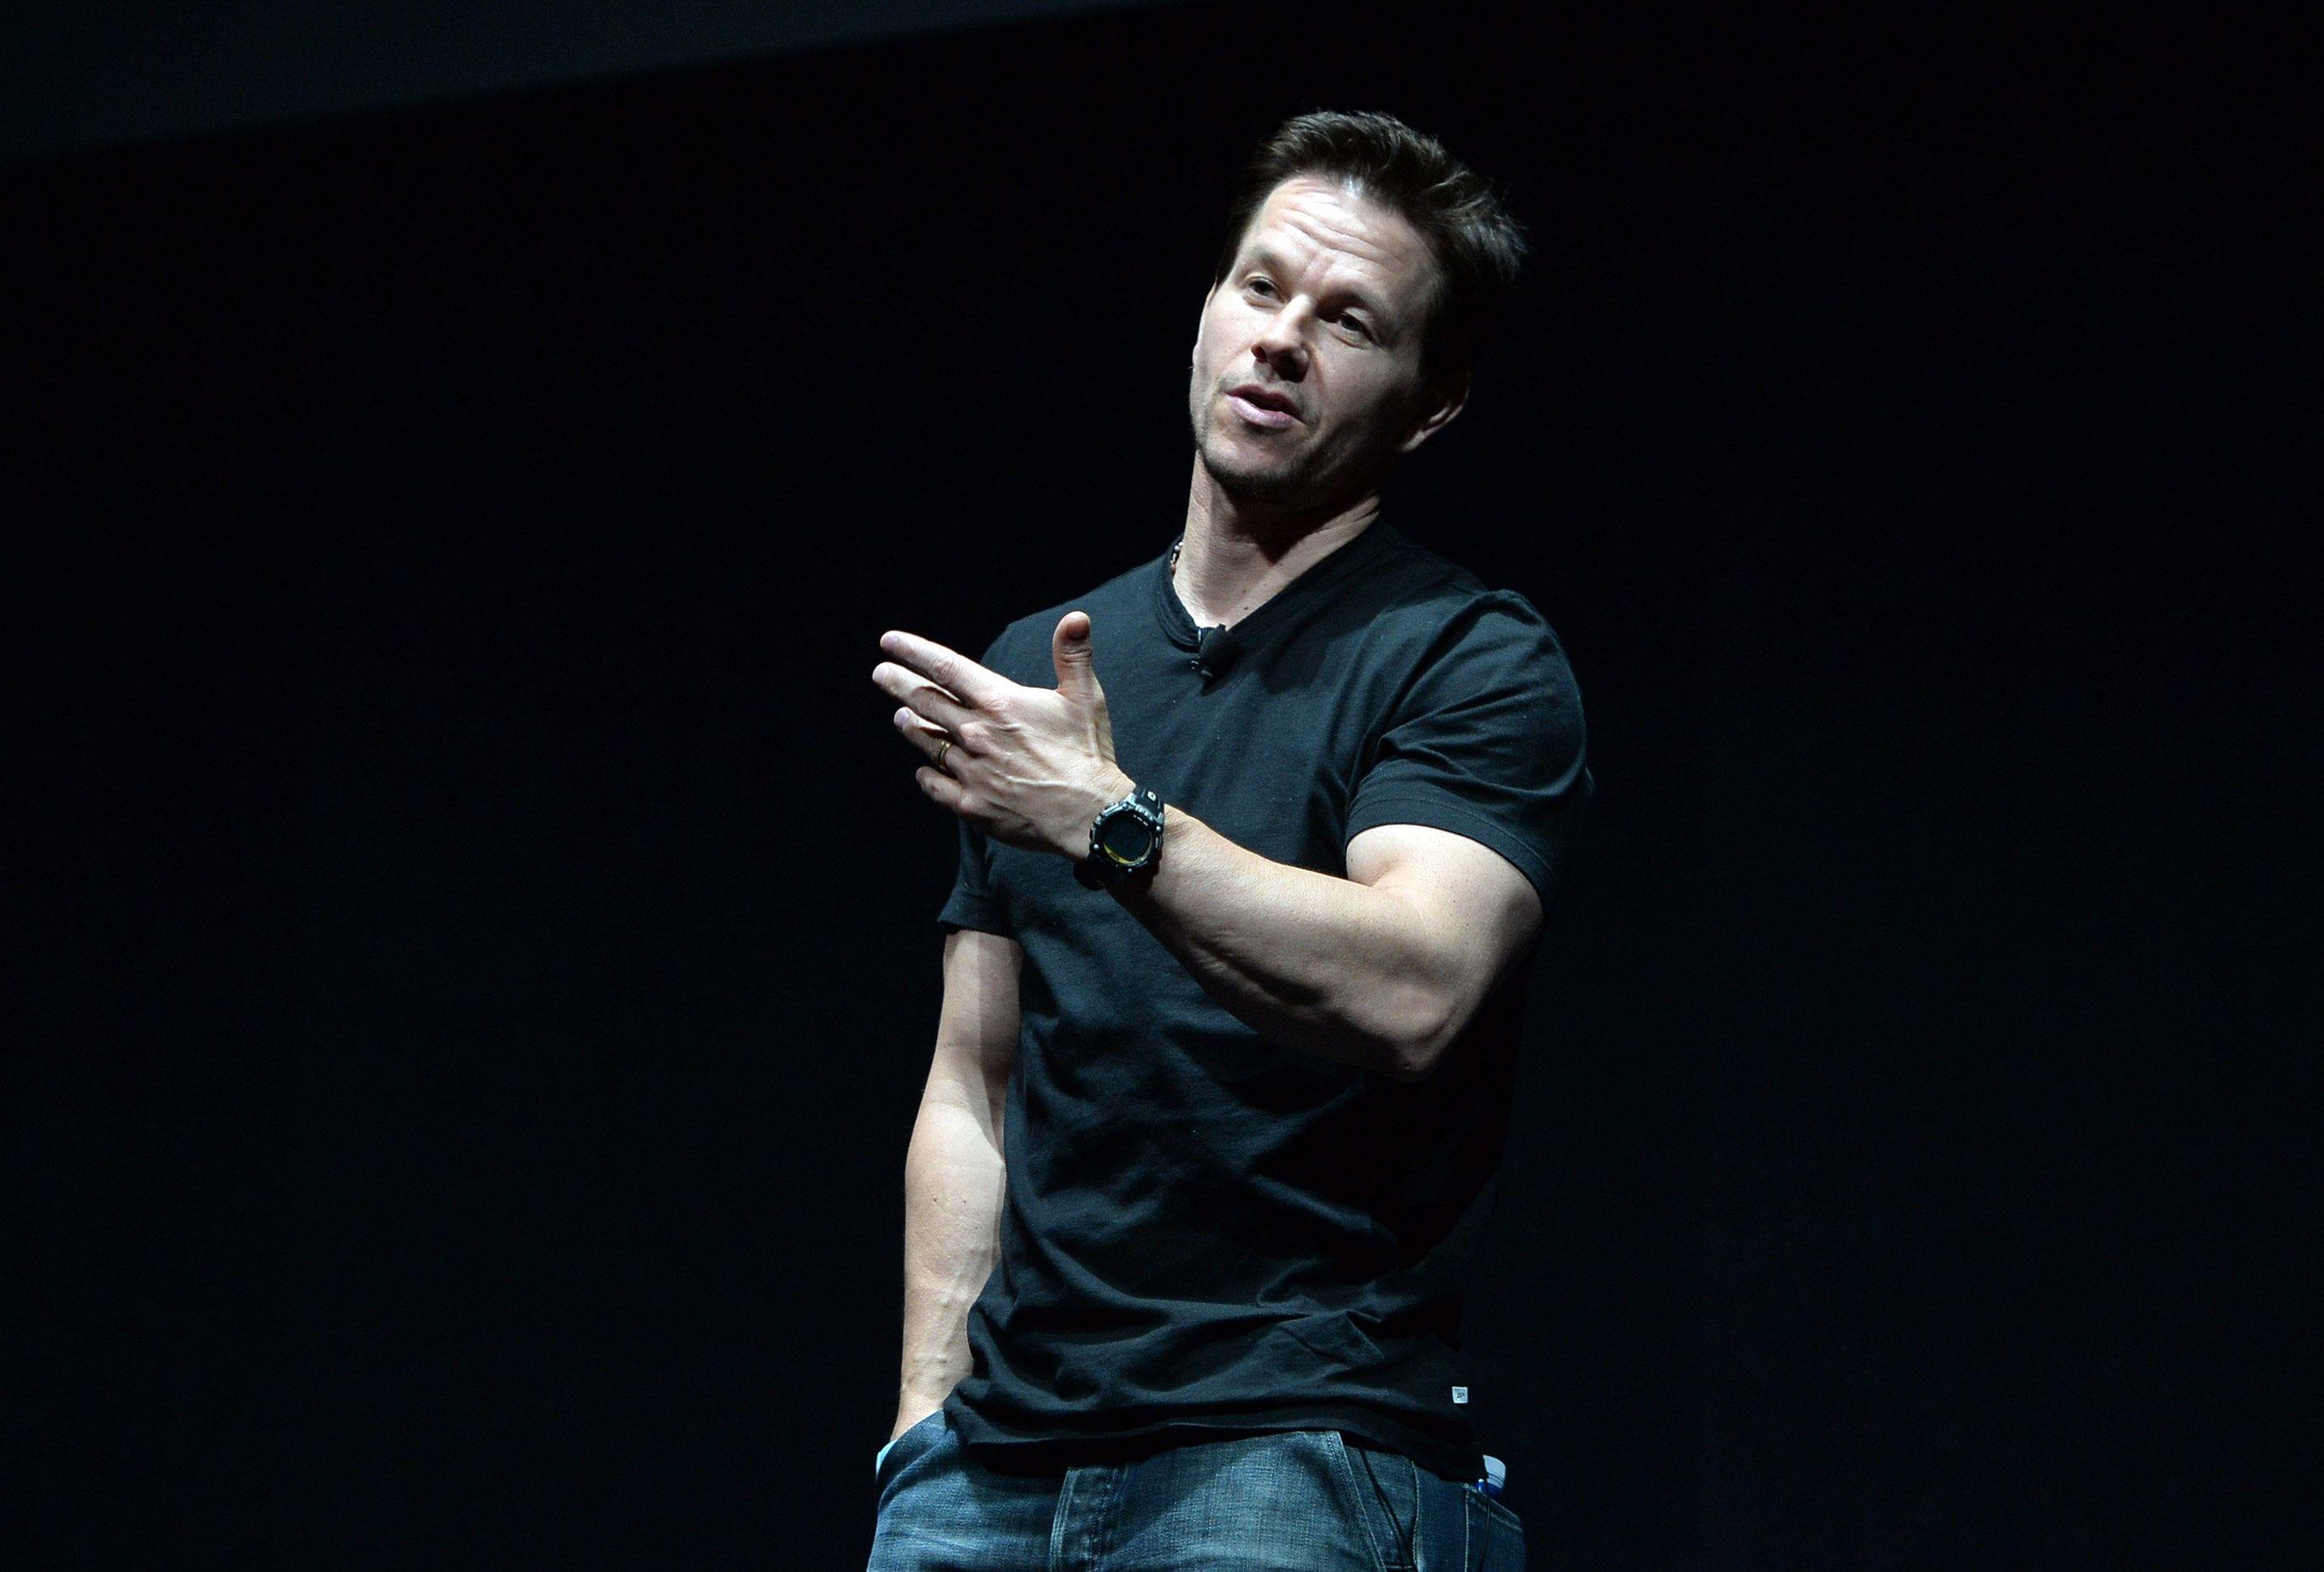 Mark Wahlberg Wallpaper High Quality